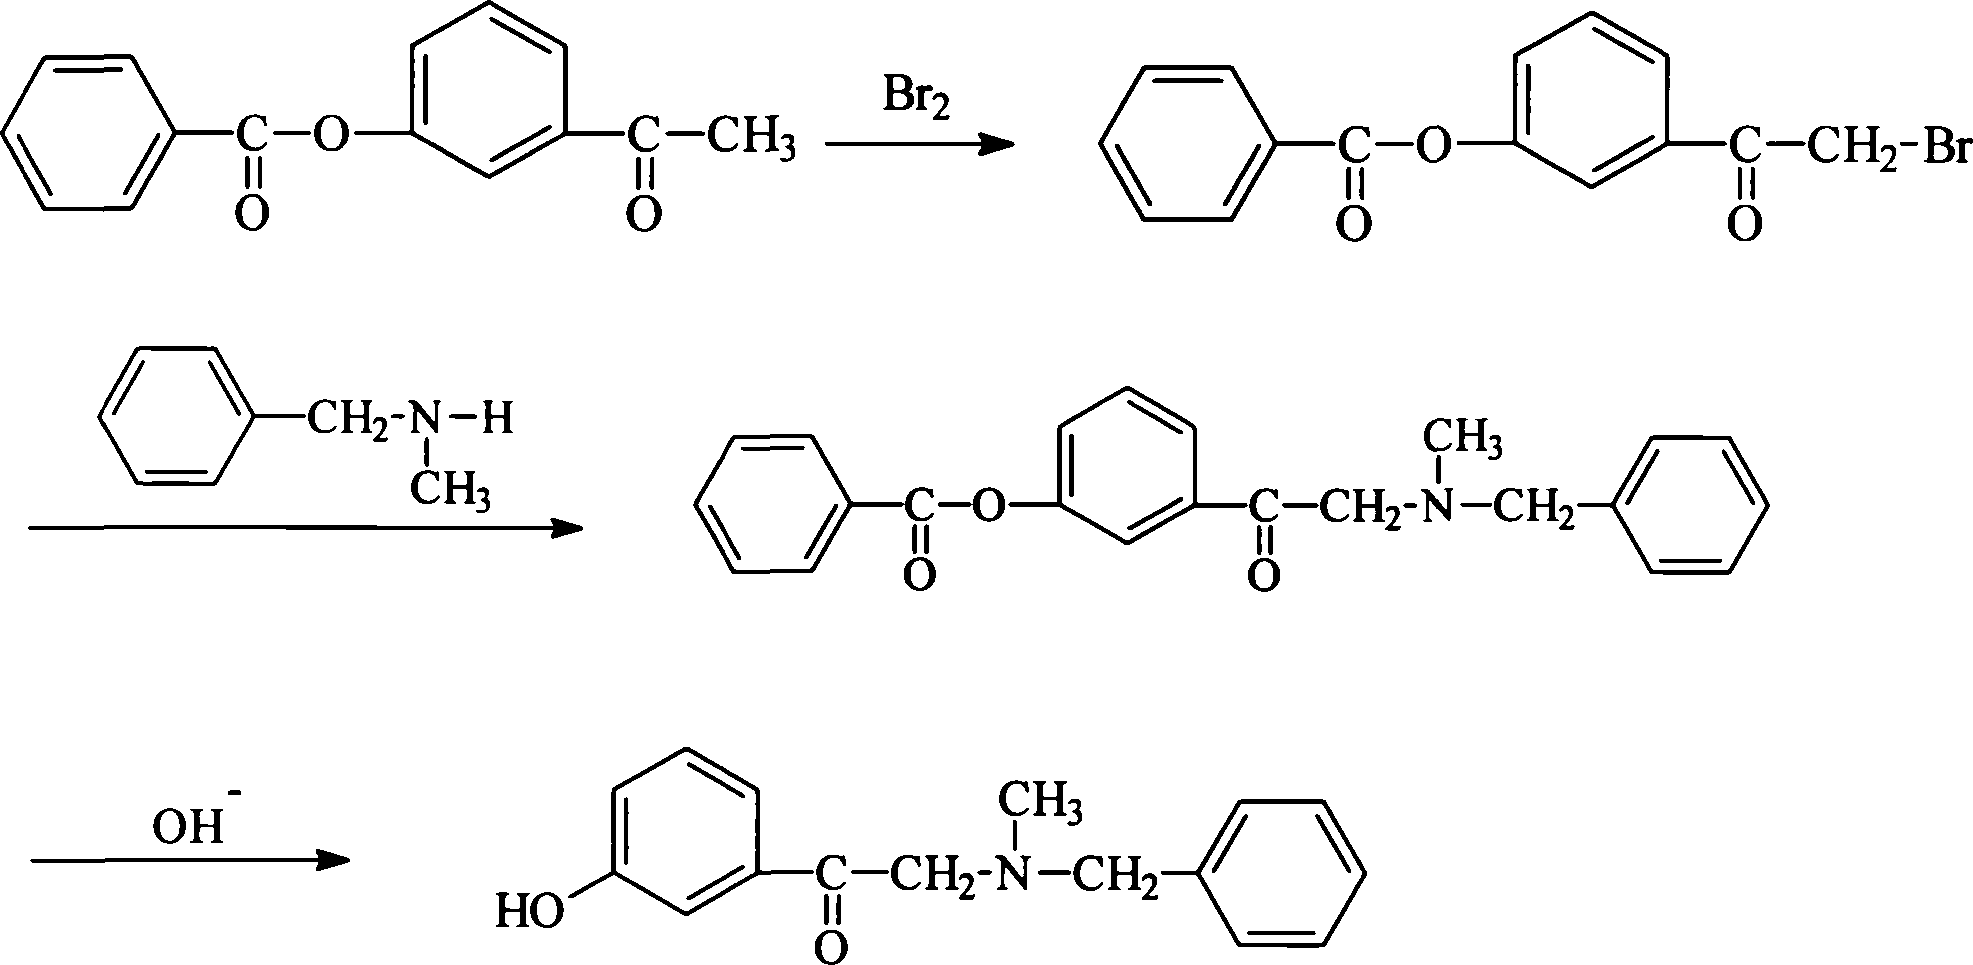 Process for synthesizing alpha-(N-methyl-benzyl)-3-hydroxy acetophenone